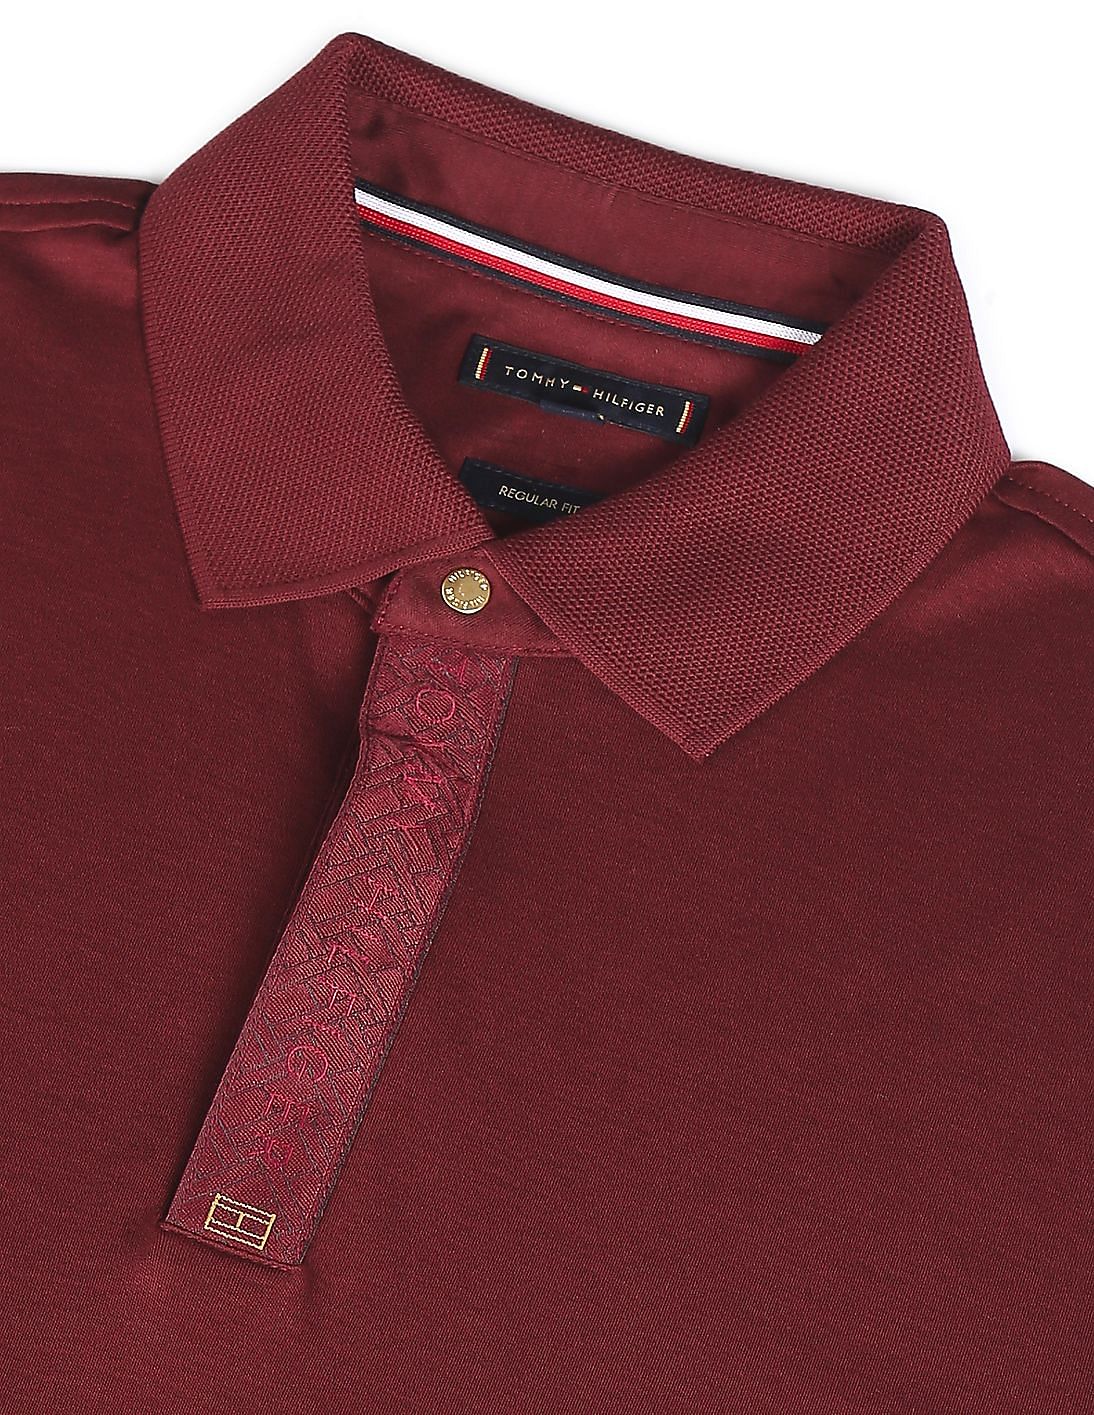 Tommy Hilfiger polo shirt for men, red - متجر روج سفن